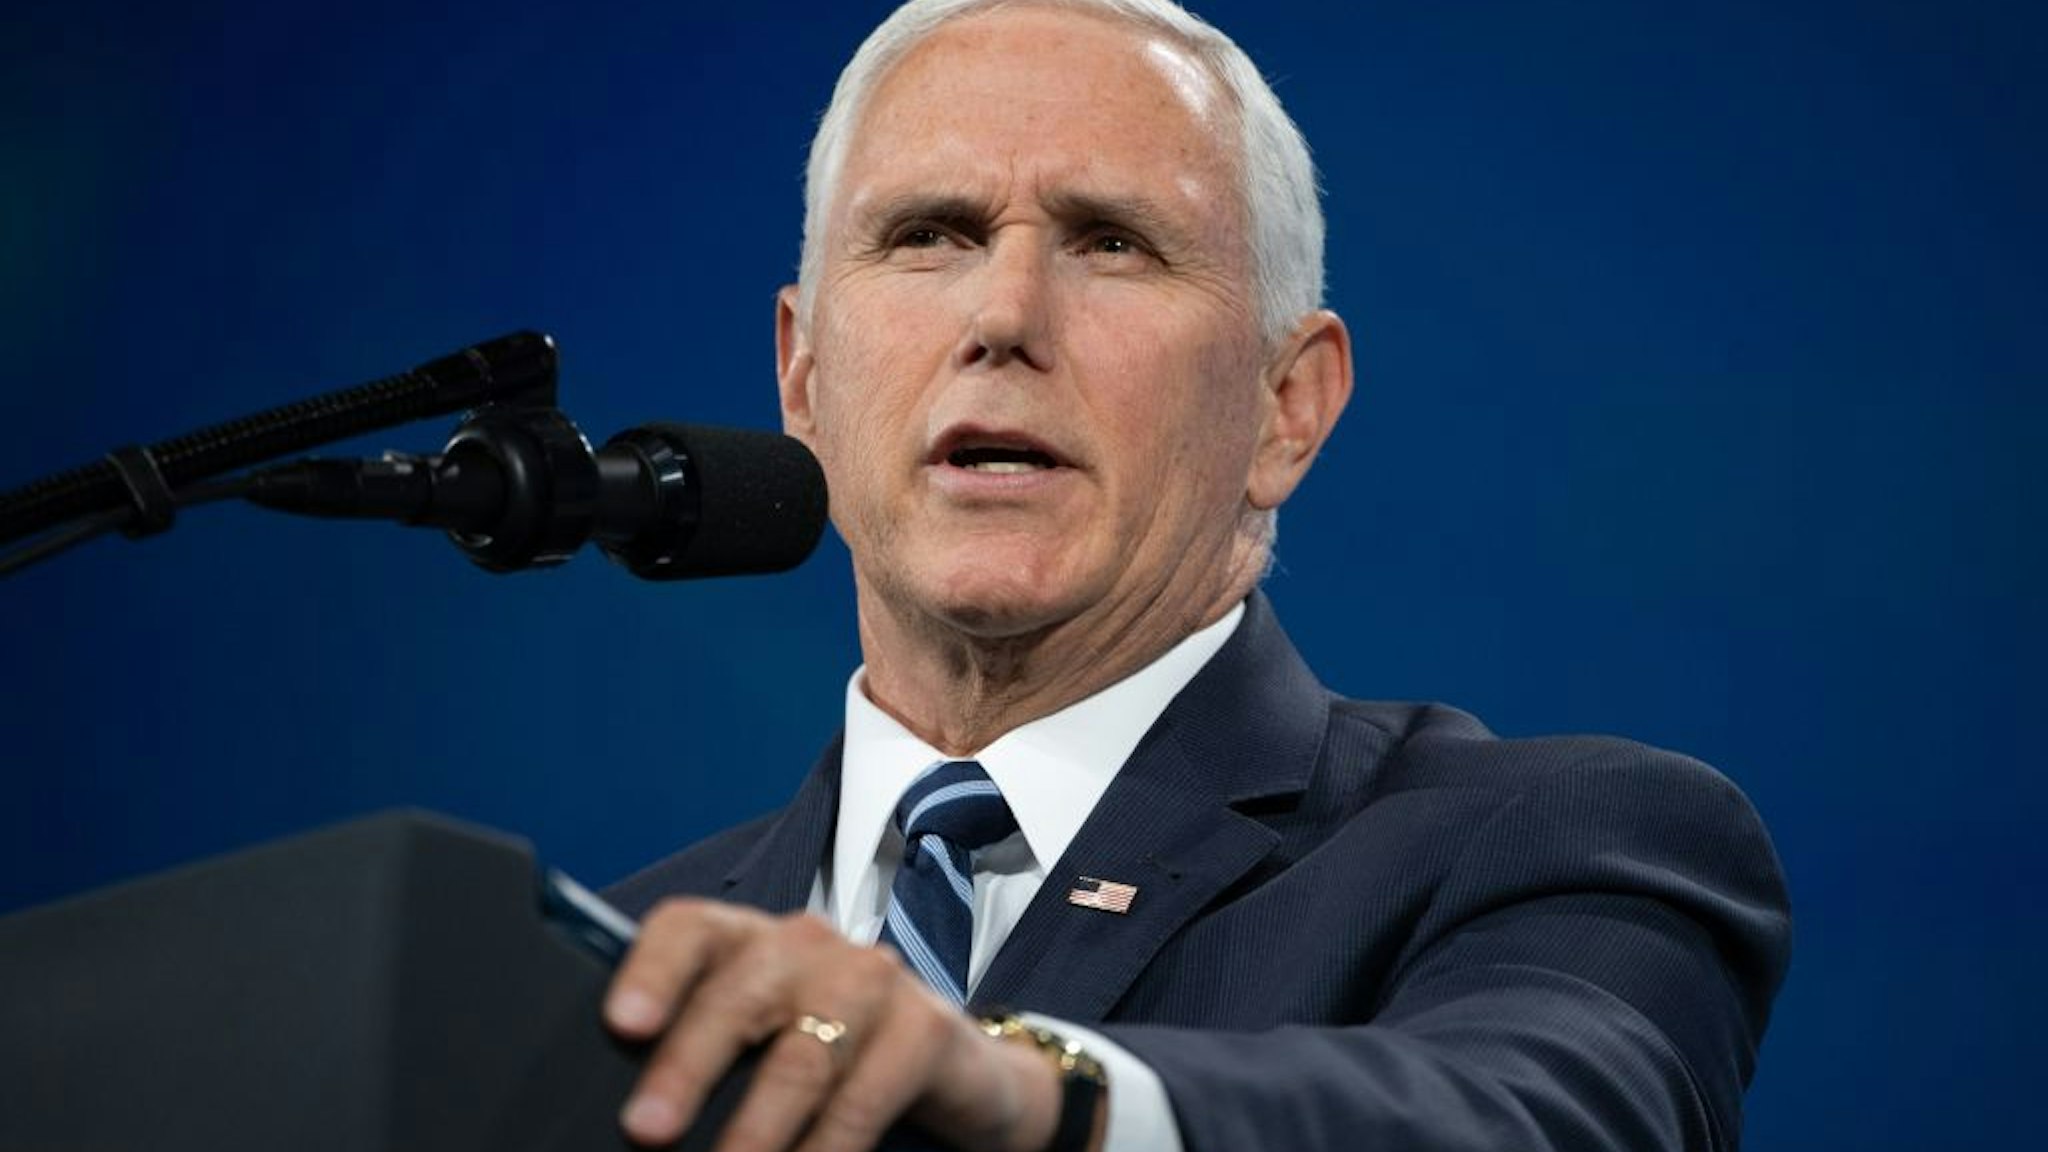 Vice President Mike Pence speaks at the National Rifle Association (NRA) Annual Meeting